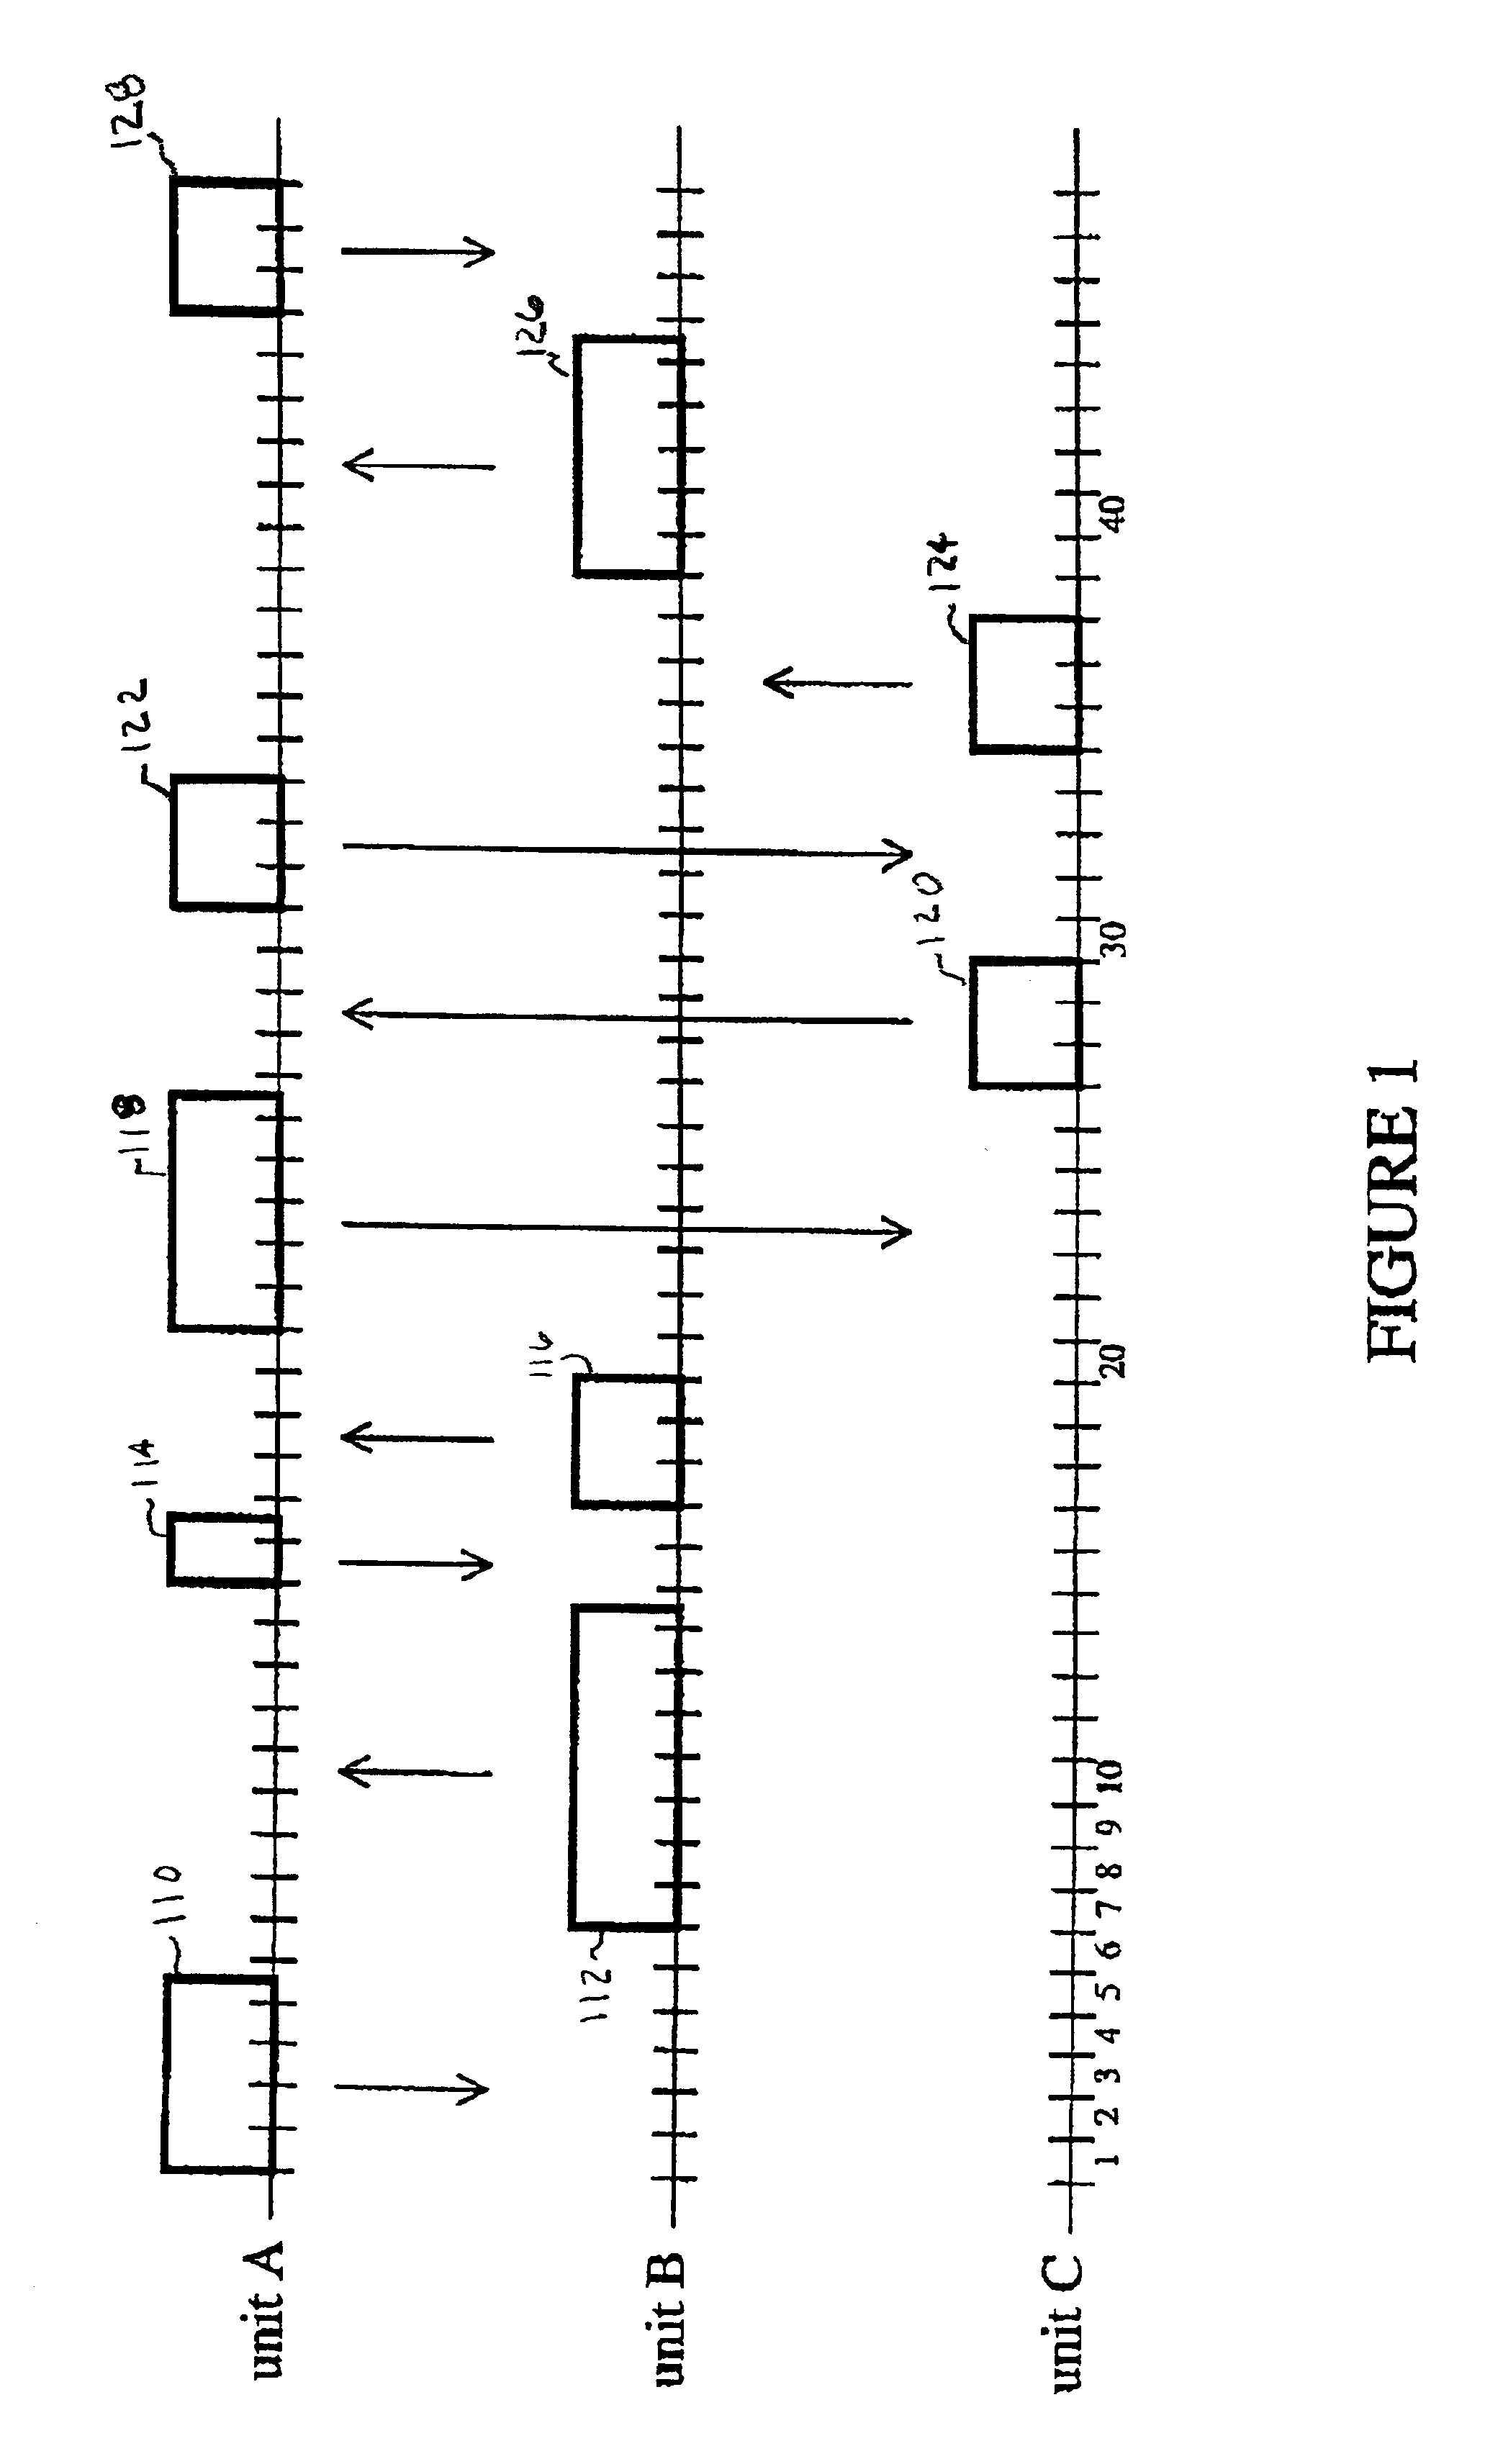 System and method for providing quality of service and contention resolution in ad-hoc communication systems